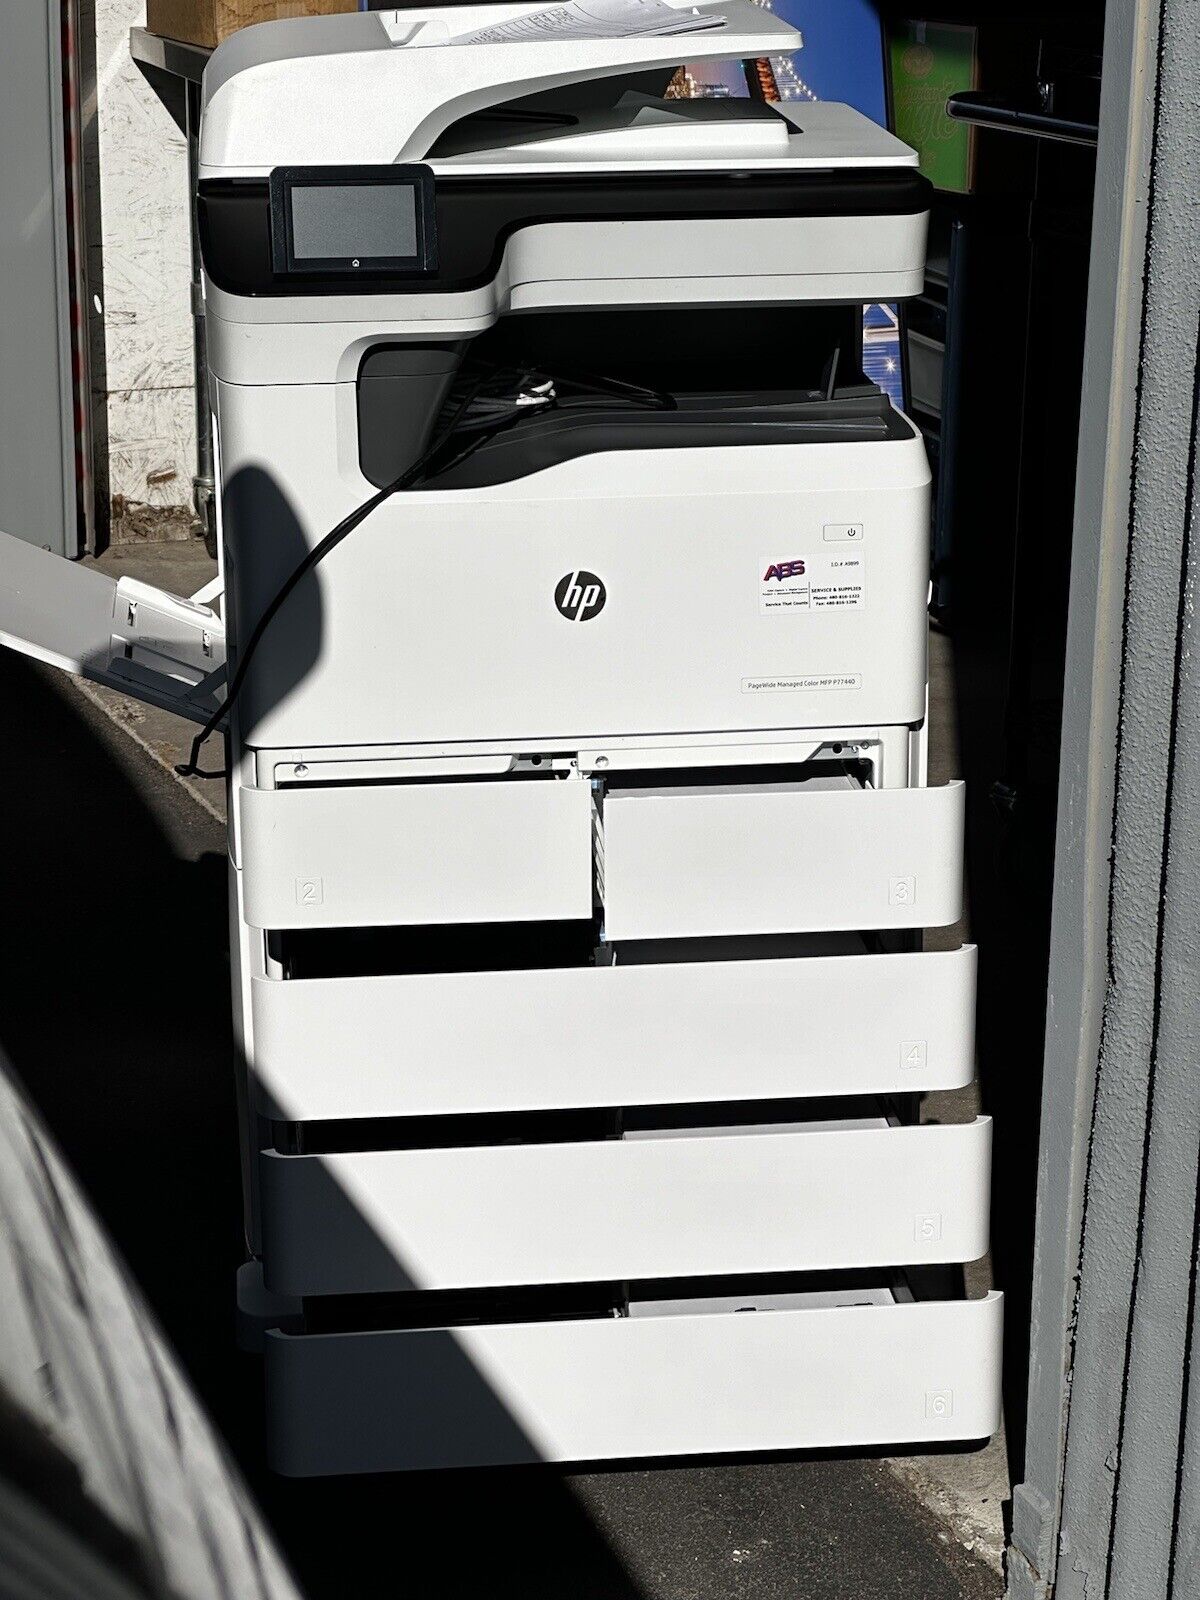 Pagewide Managed Color mfp P77440